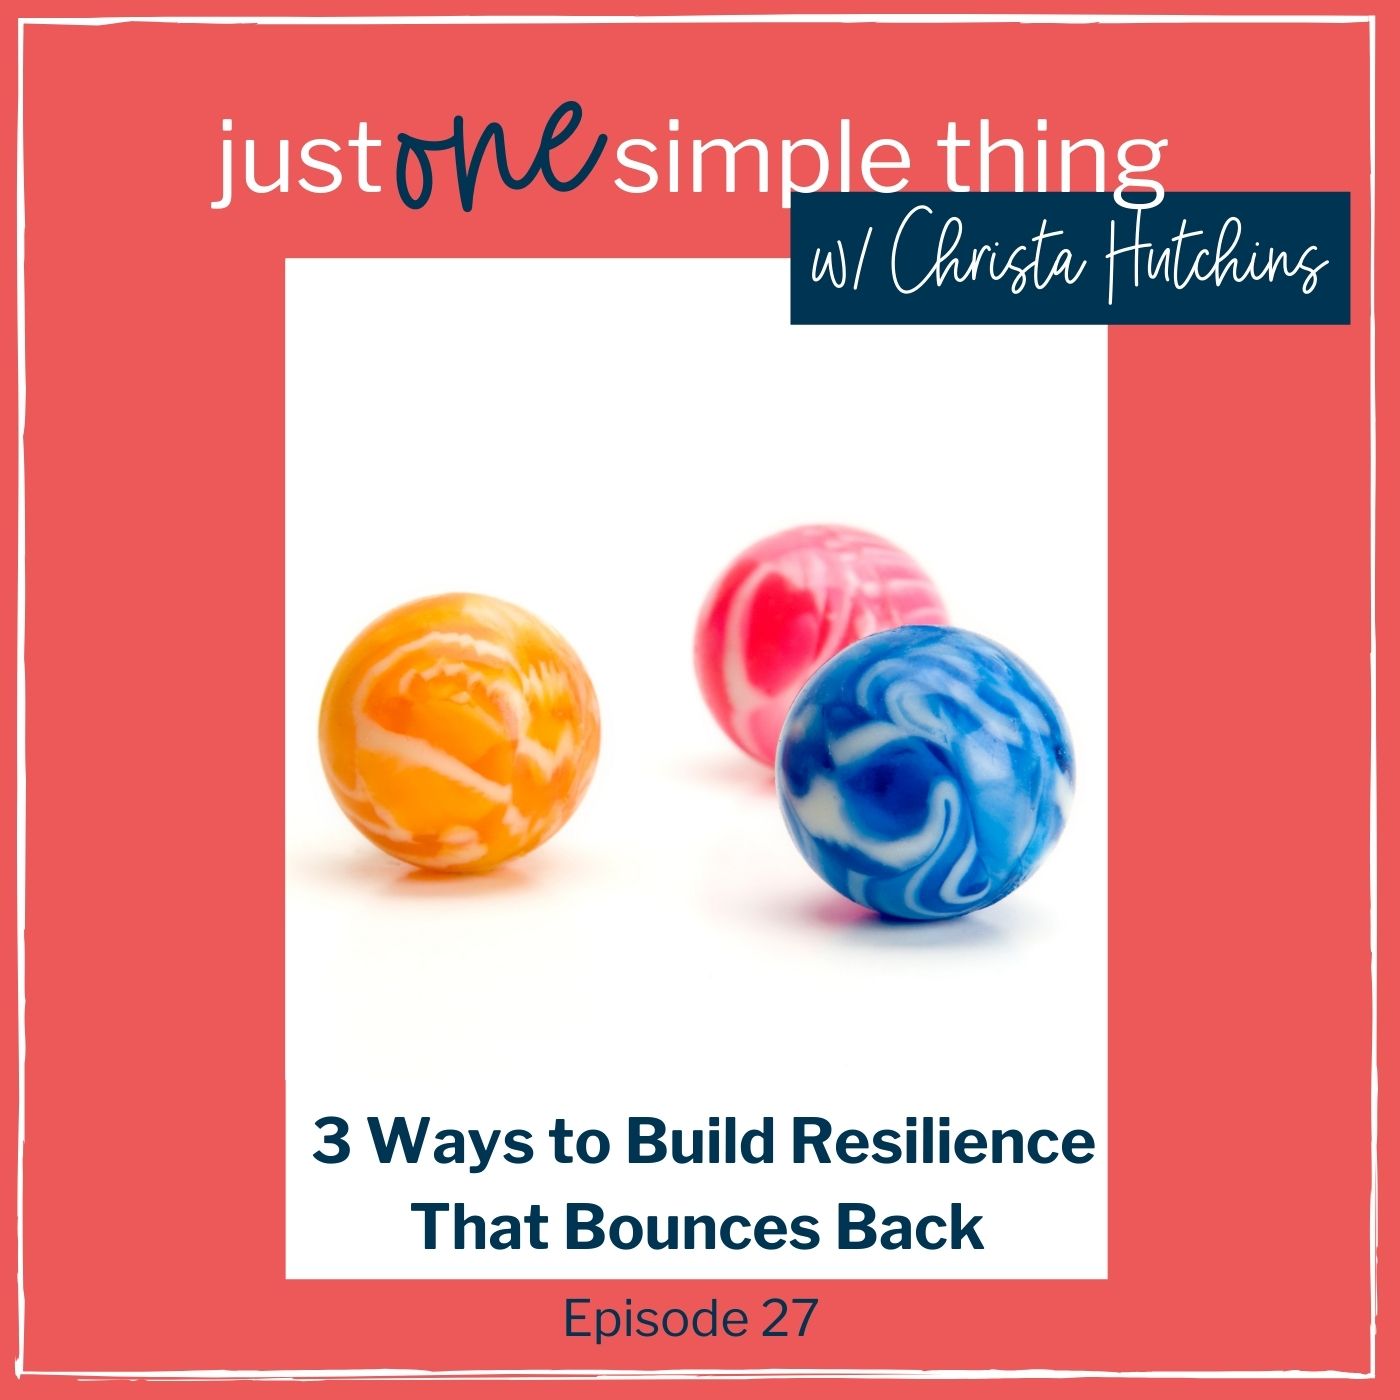 3 Ways to Build Resilience That Bounces Back